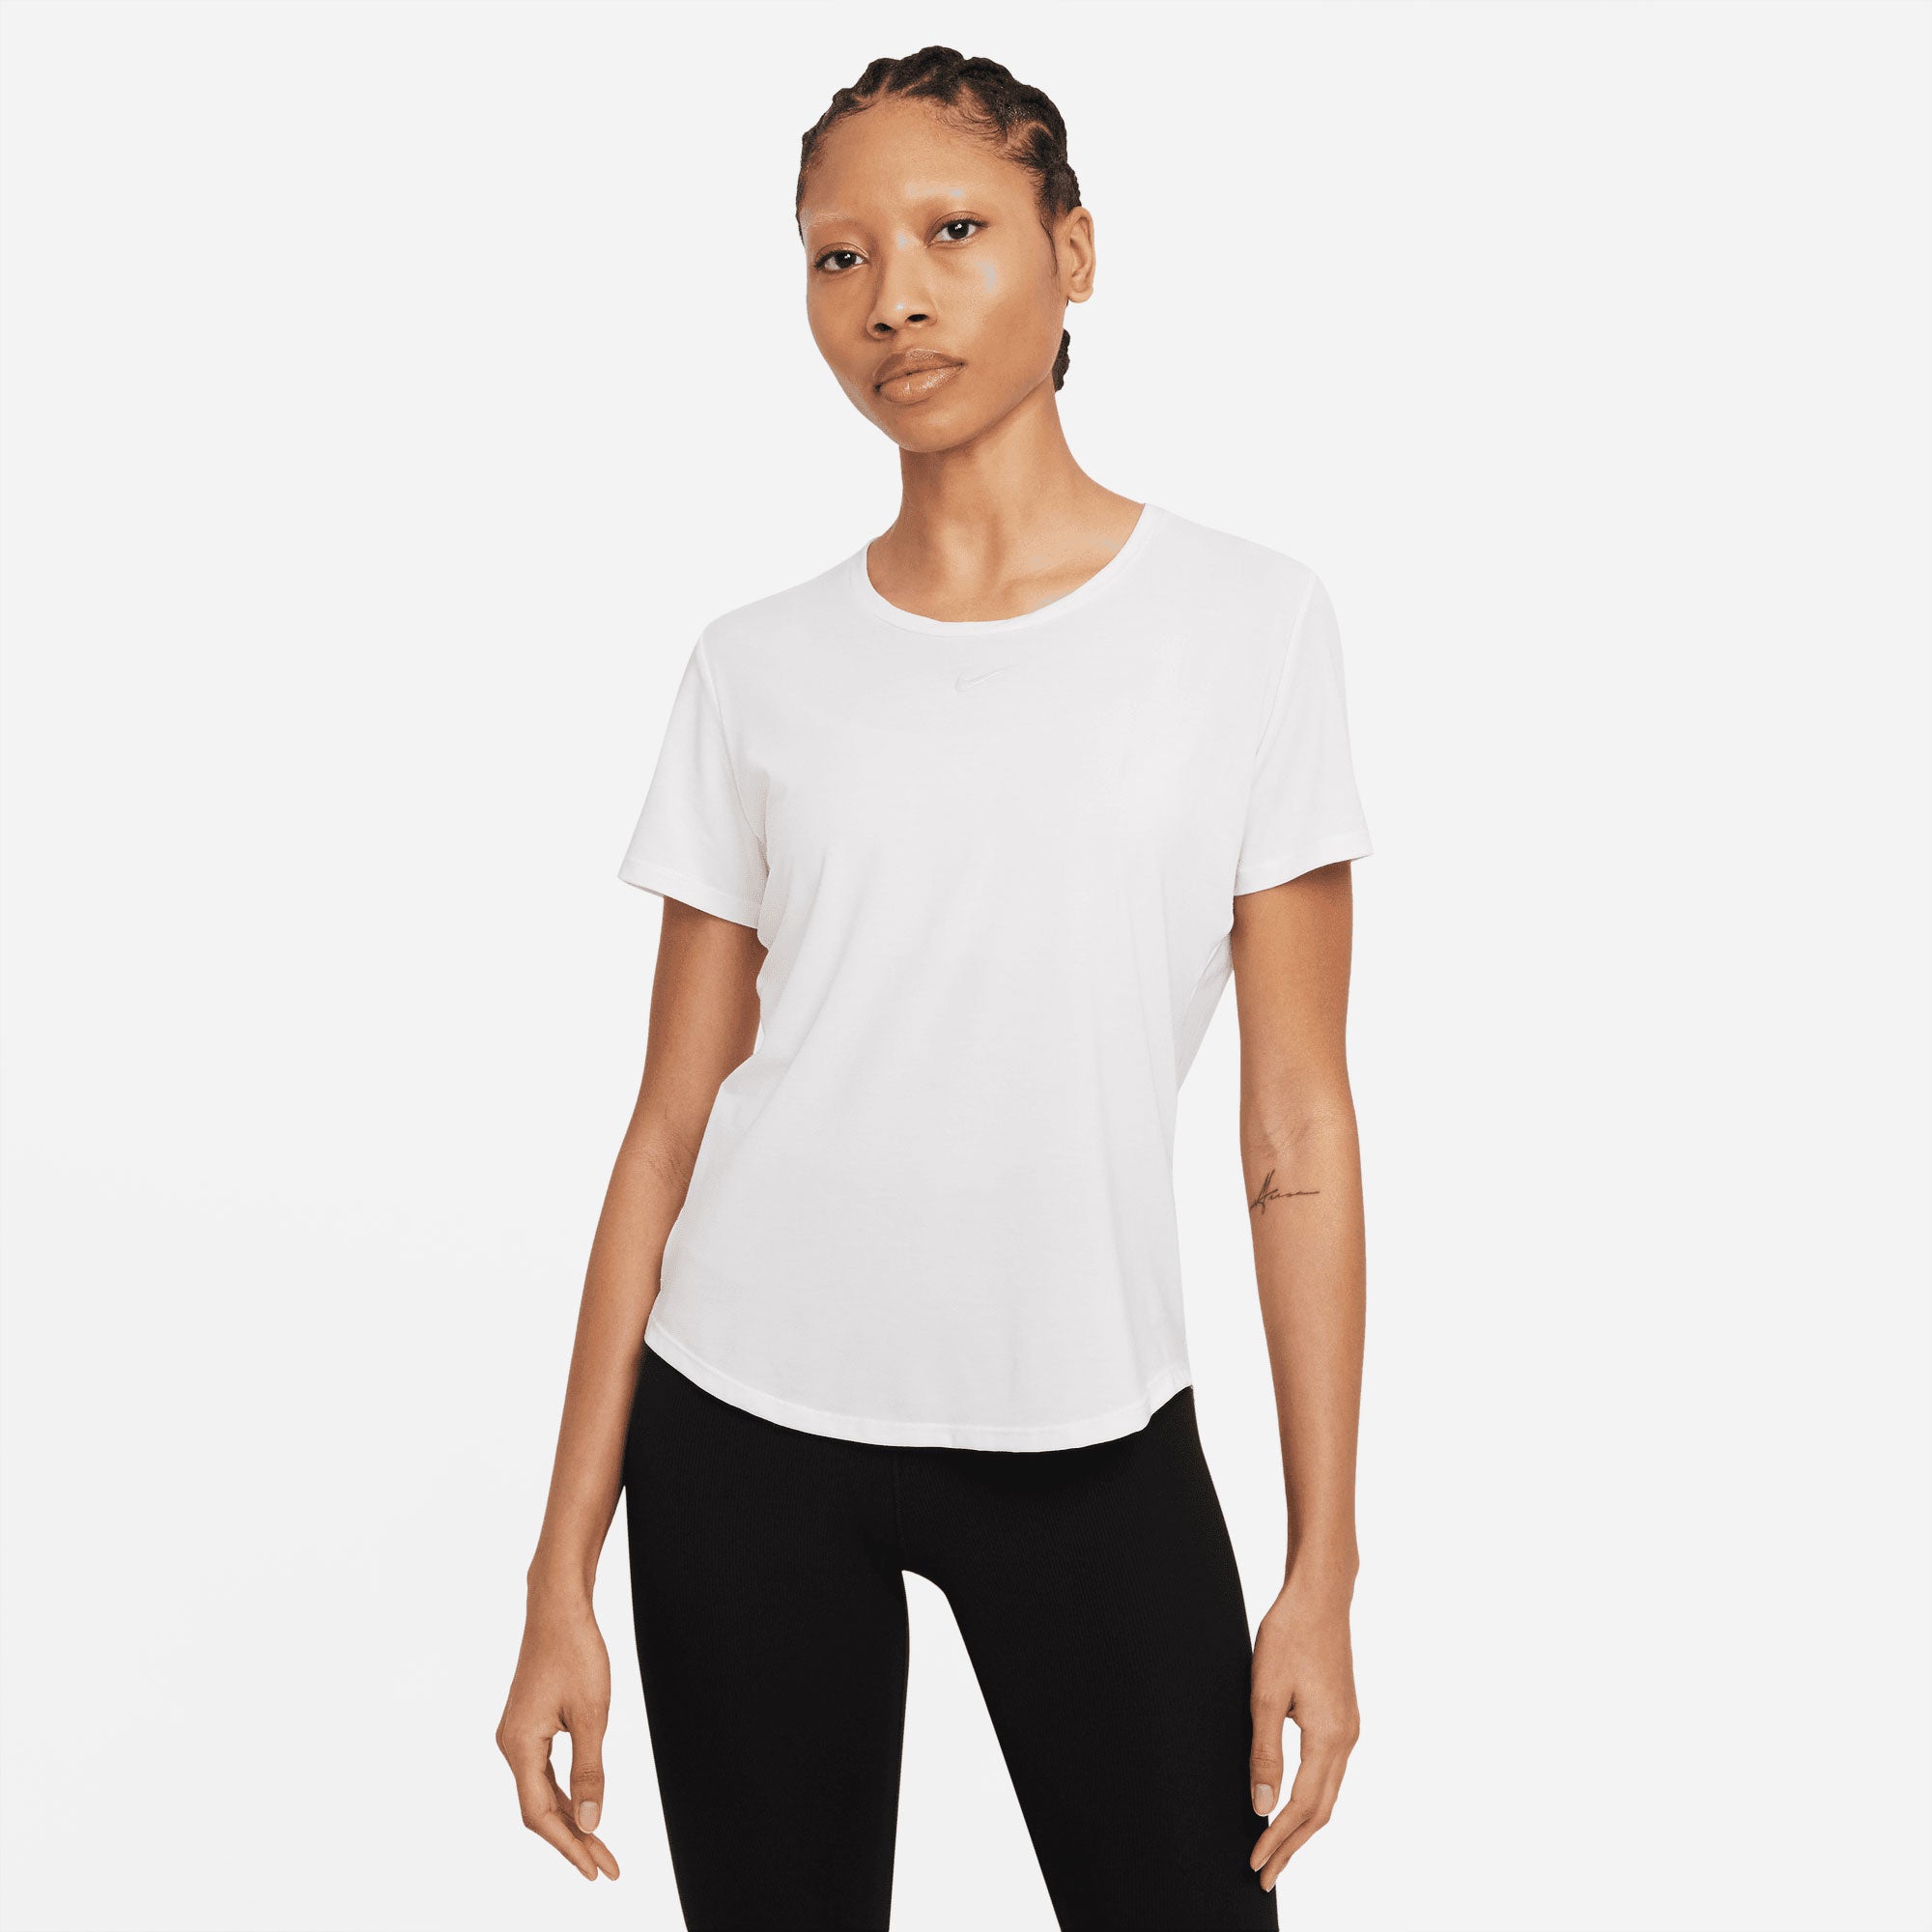 Nike One Luxe Dri-FIT Women's Standard Fit Shirt White (1)